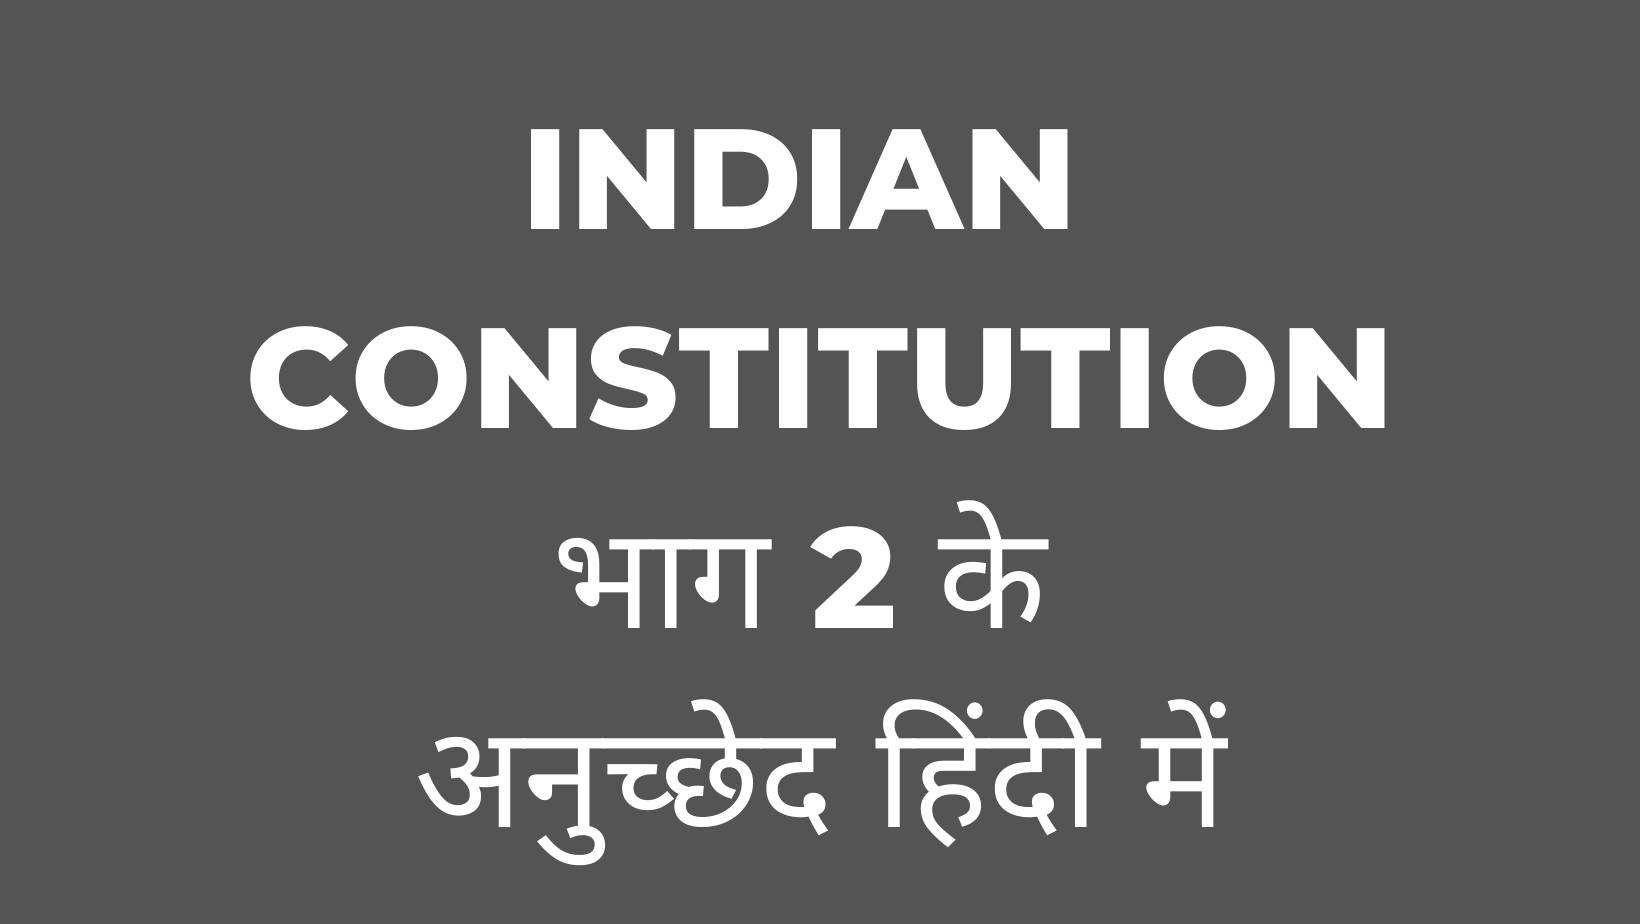 INDIAN CONSTITUTION PART 2 ARTICLE